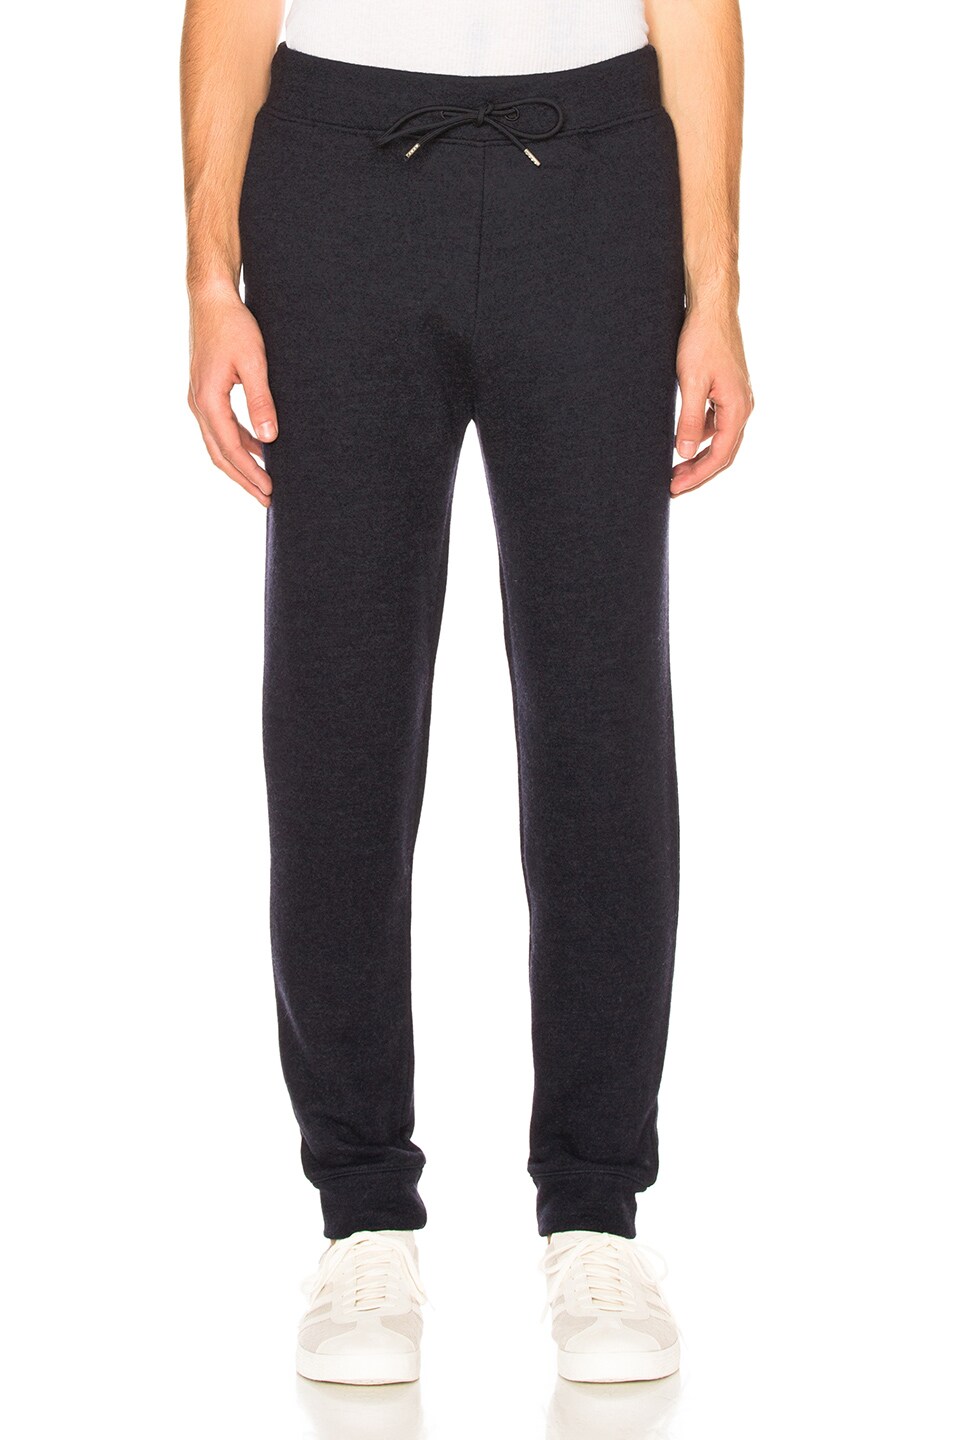 Image 1 of A.P.C. Lad Sweatpants in Marine Chine